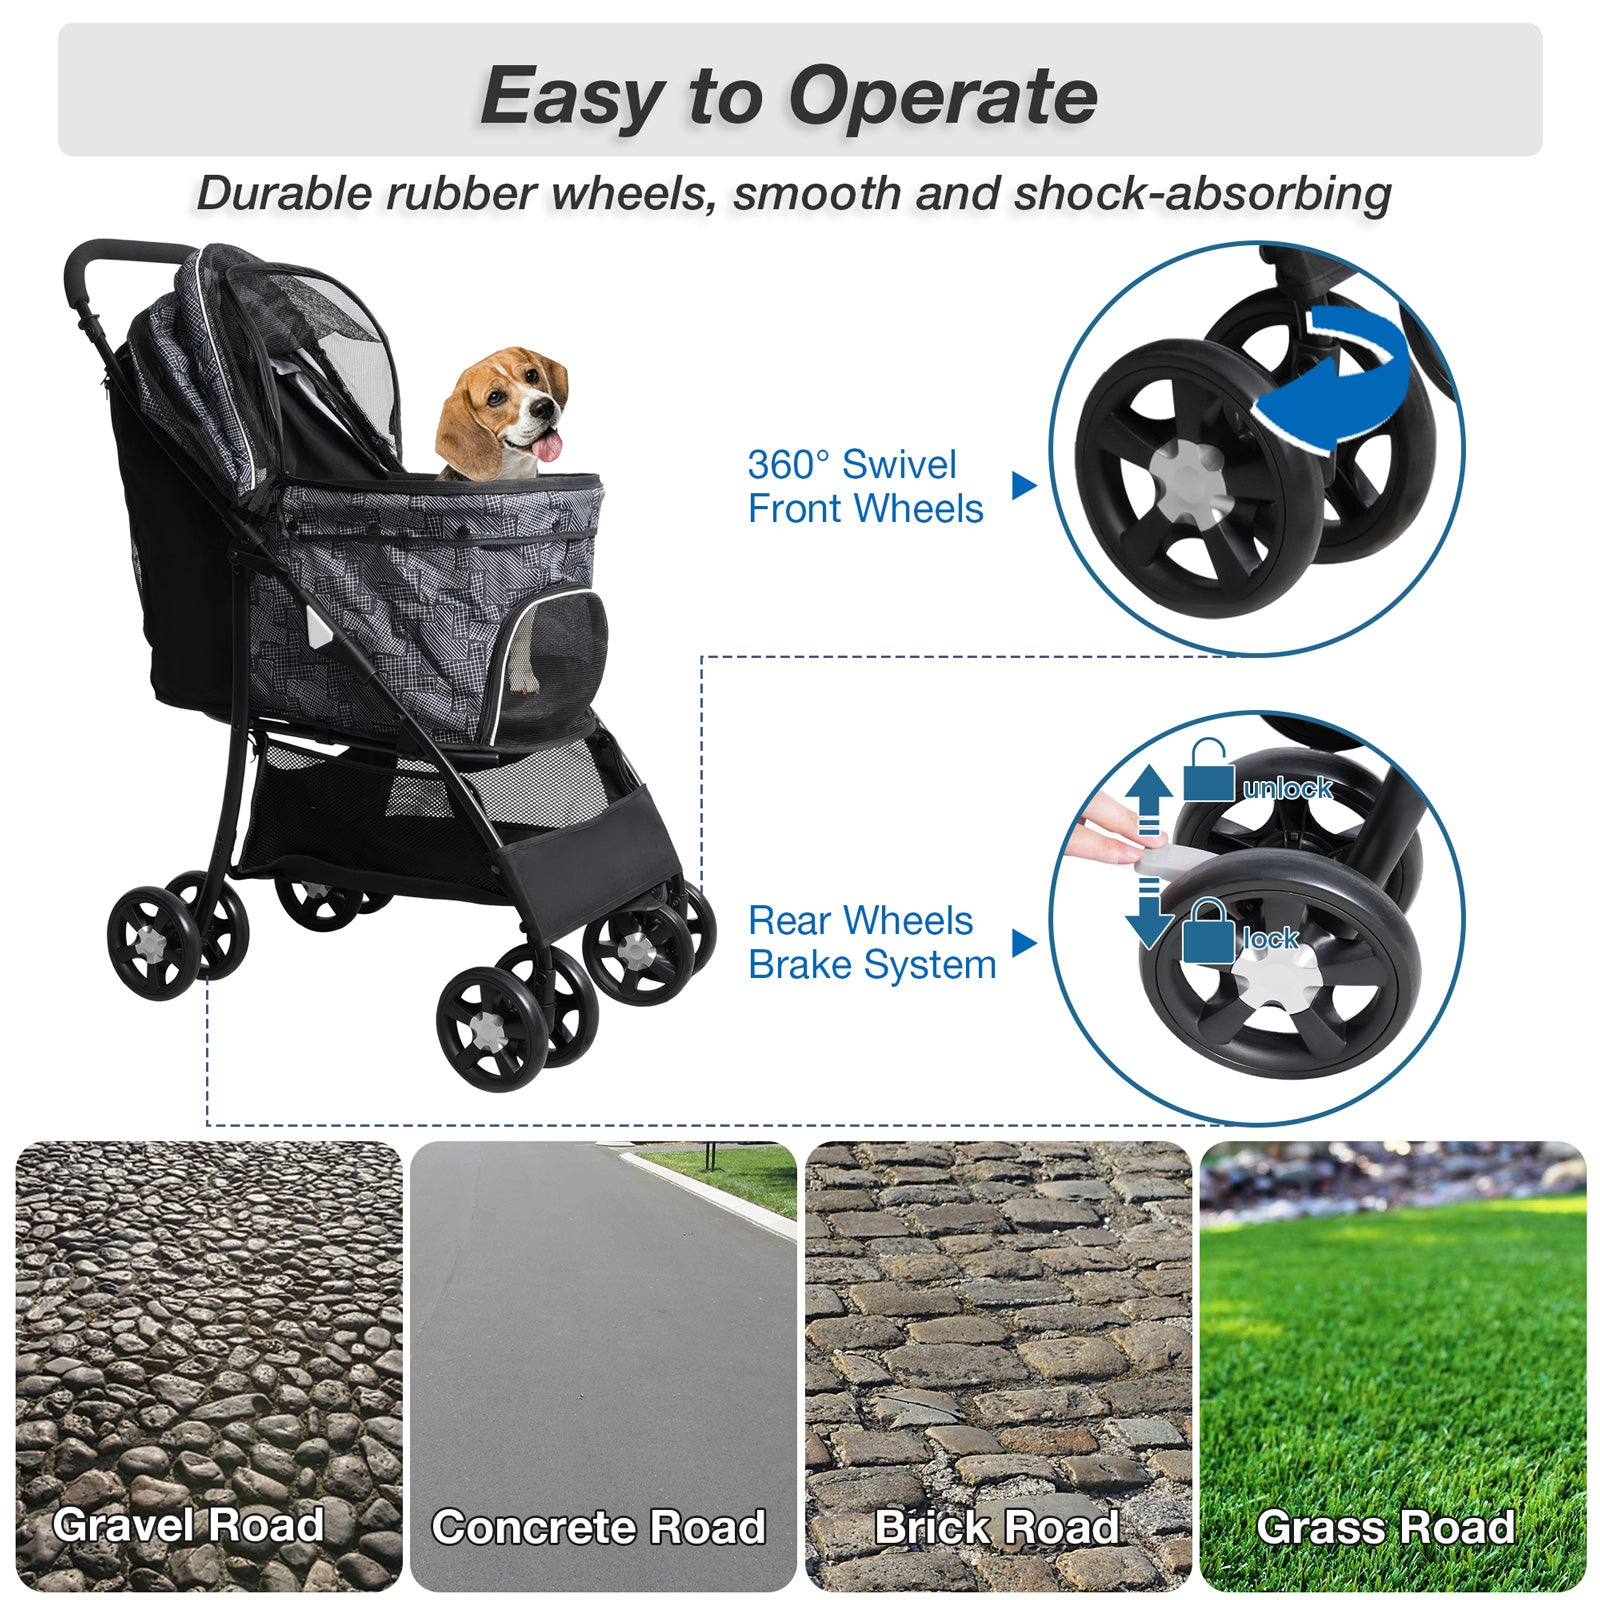 Lightweight Foldable Travel Carriage Pet Stroller with Storage Basket Breathable Mesh, Black